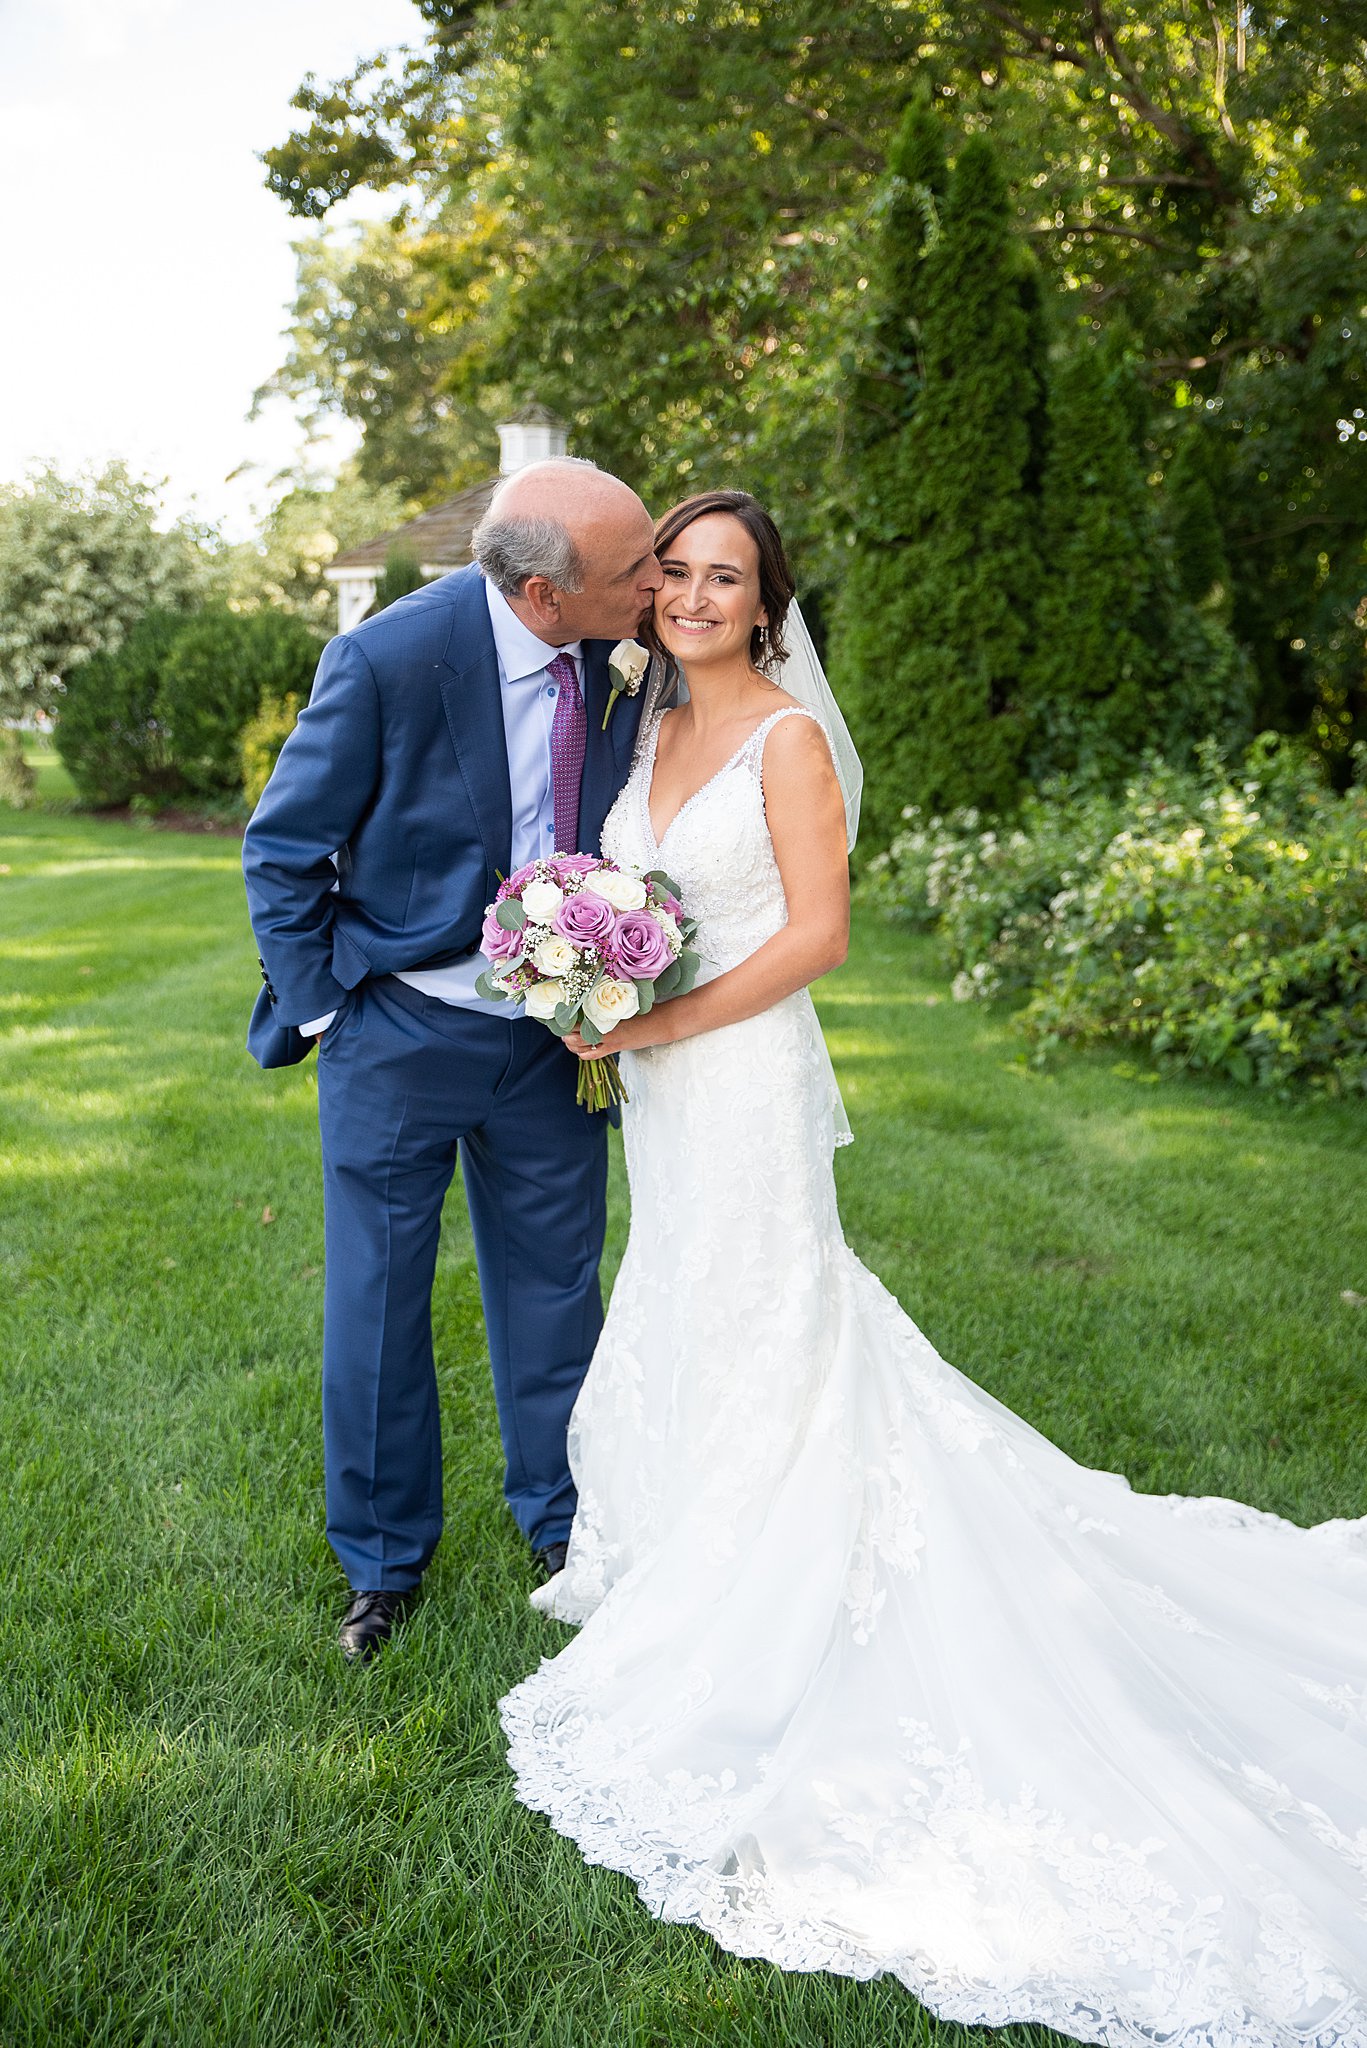 bride's father kissing her on the cheek before walking her down the aisle